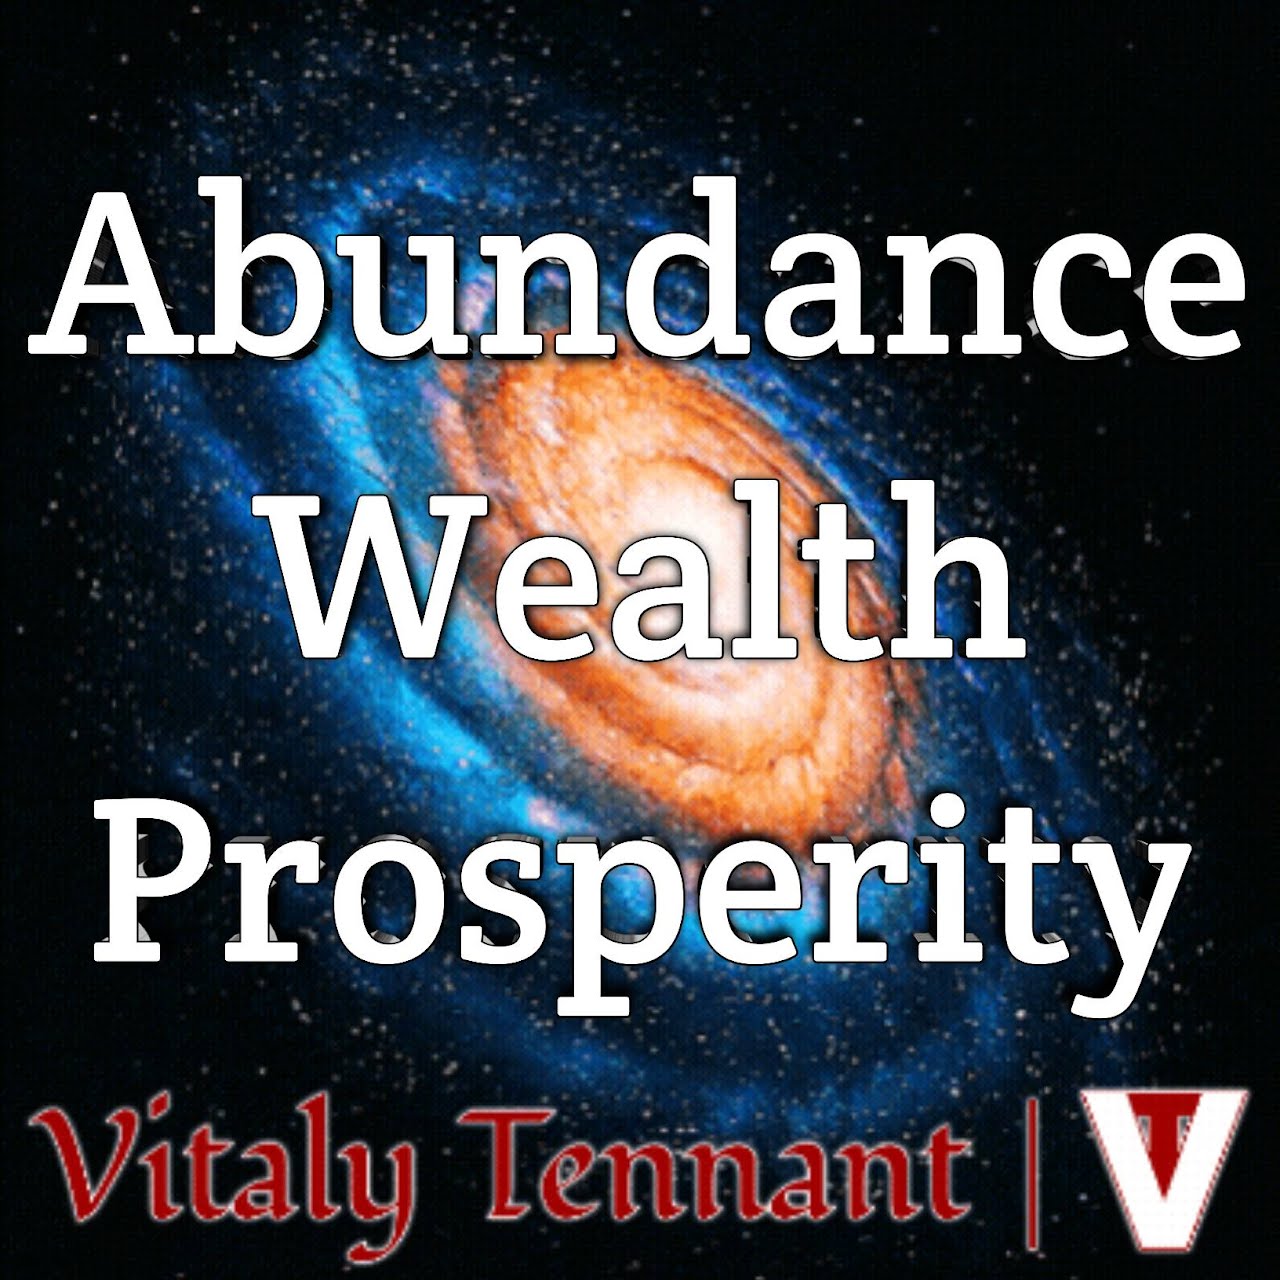 Featured image for “Abundance, Wealth, and Prosperity”